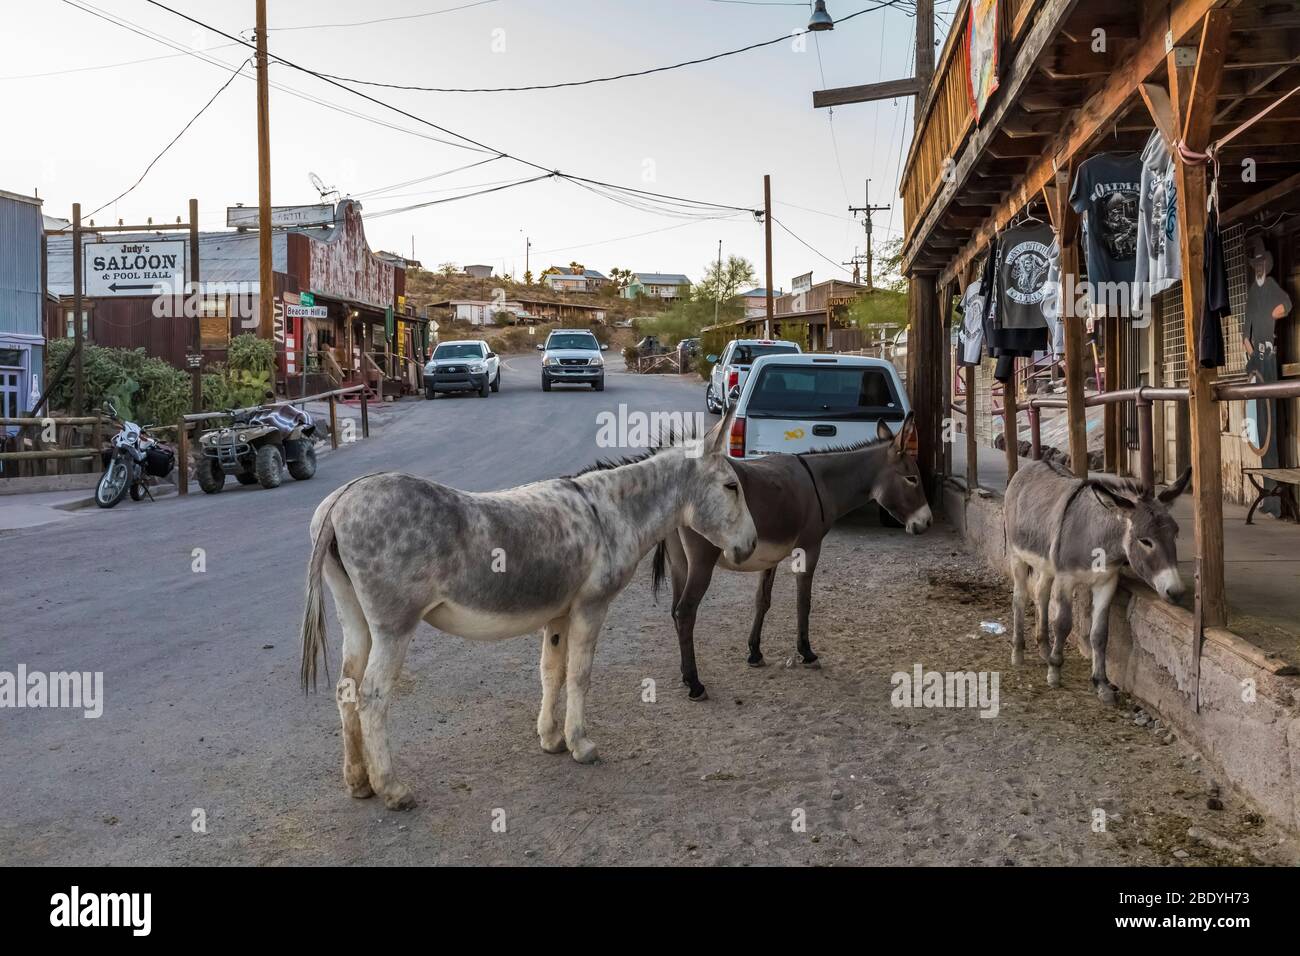 Burros, descendents of those from the old gold mining days,   coexist among tourists and businesses along Historic Route 66 in Oatman, Arizona, USA [N Stock Photo